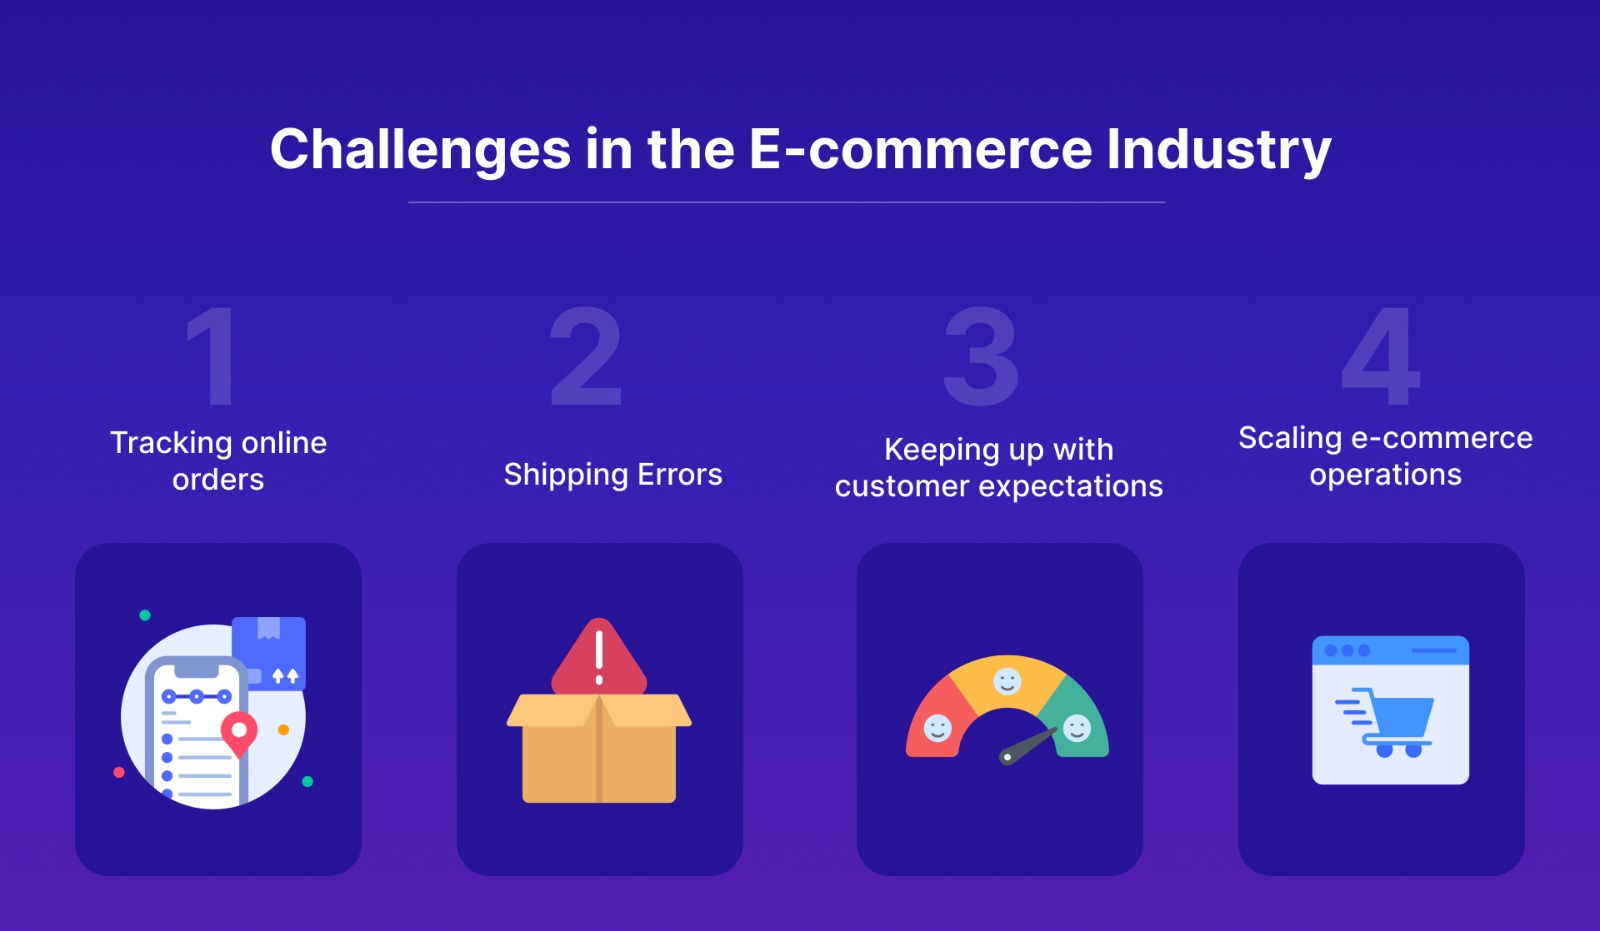 Challenges in the ecommerce industry